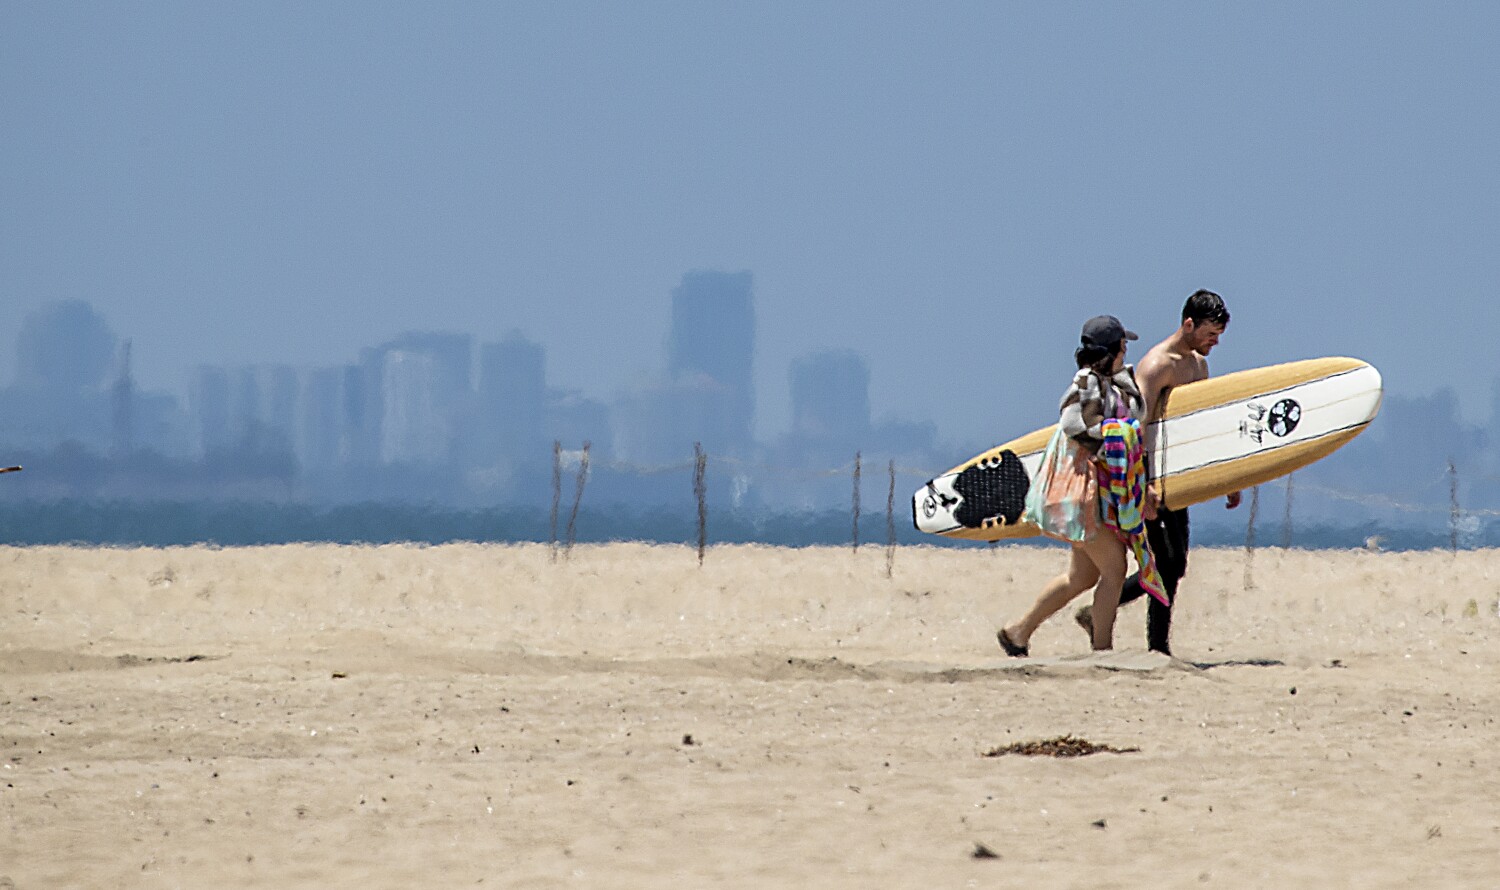 Southern California will be cool, windy on Memorial Day weekend